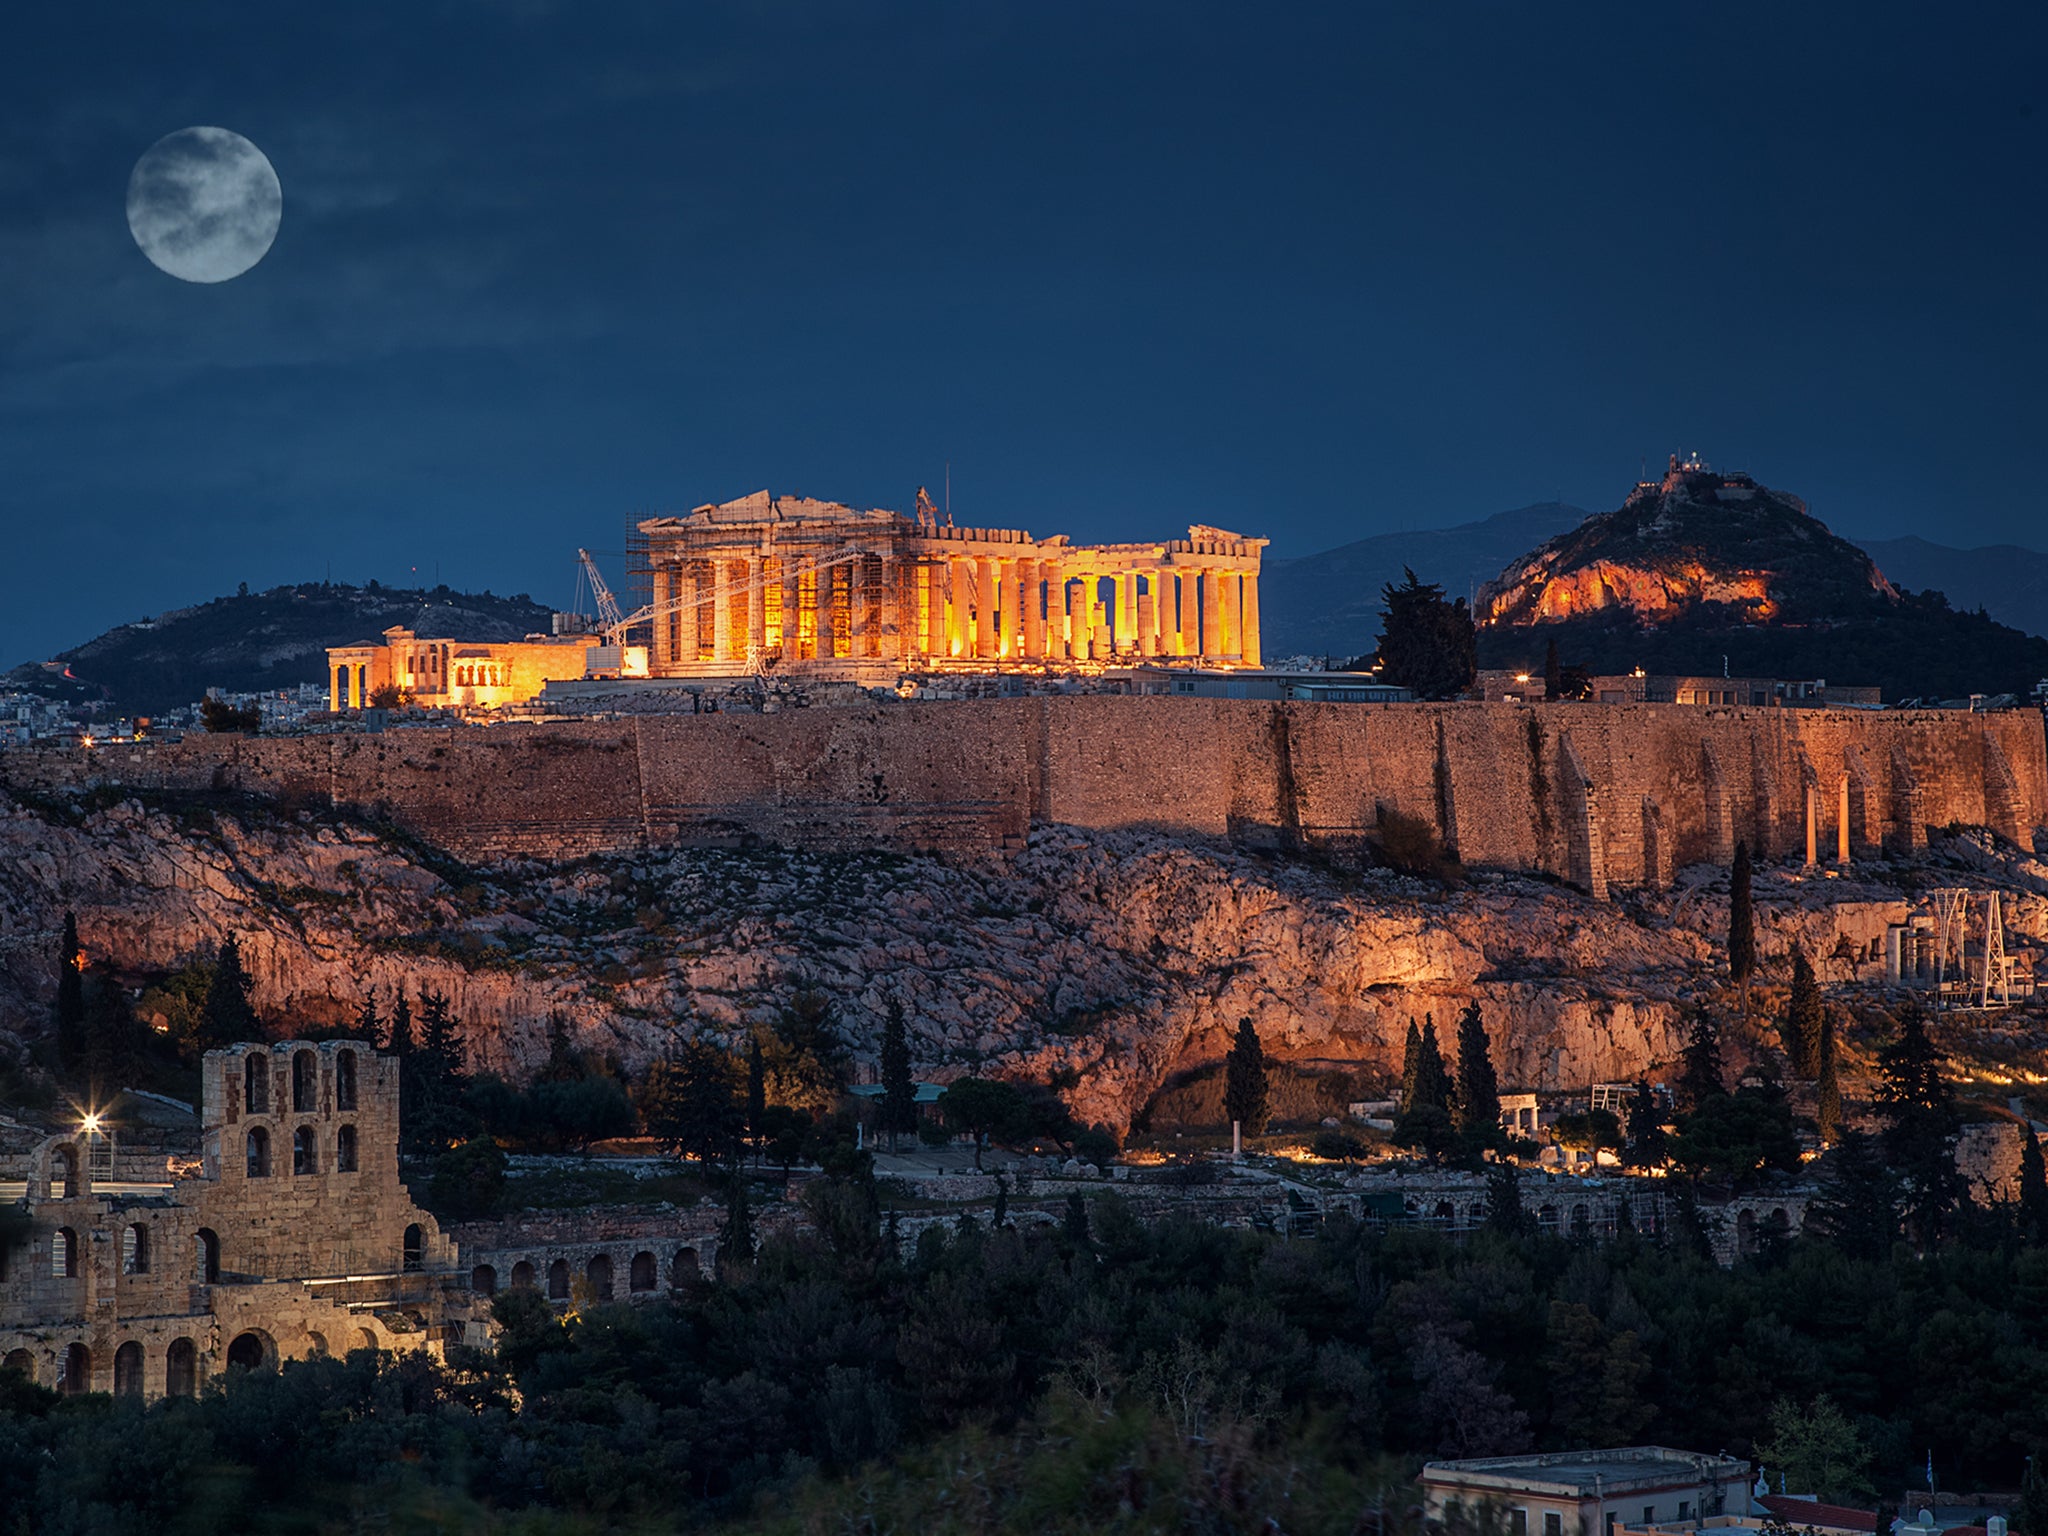 The Acropolis was once home to the Parthenon Sculptures